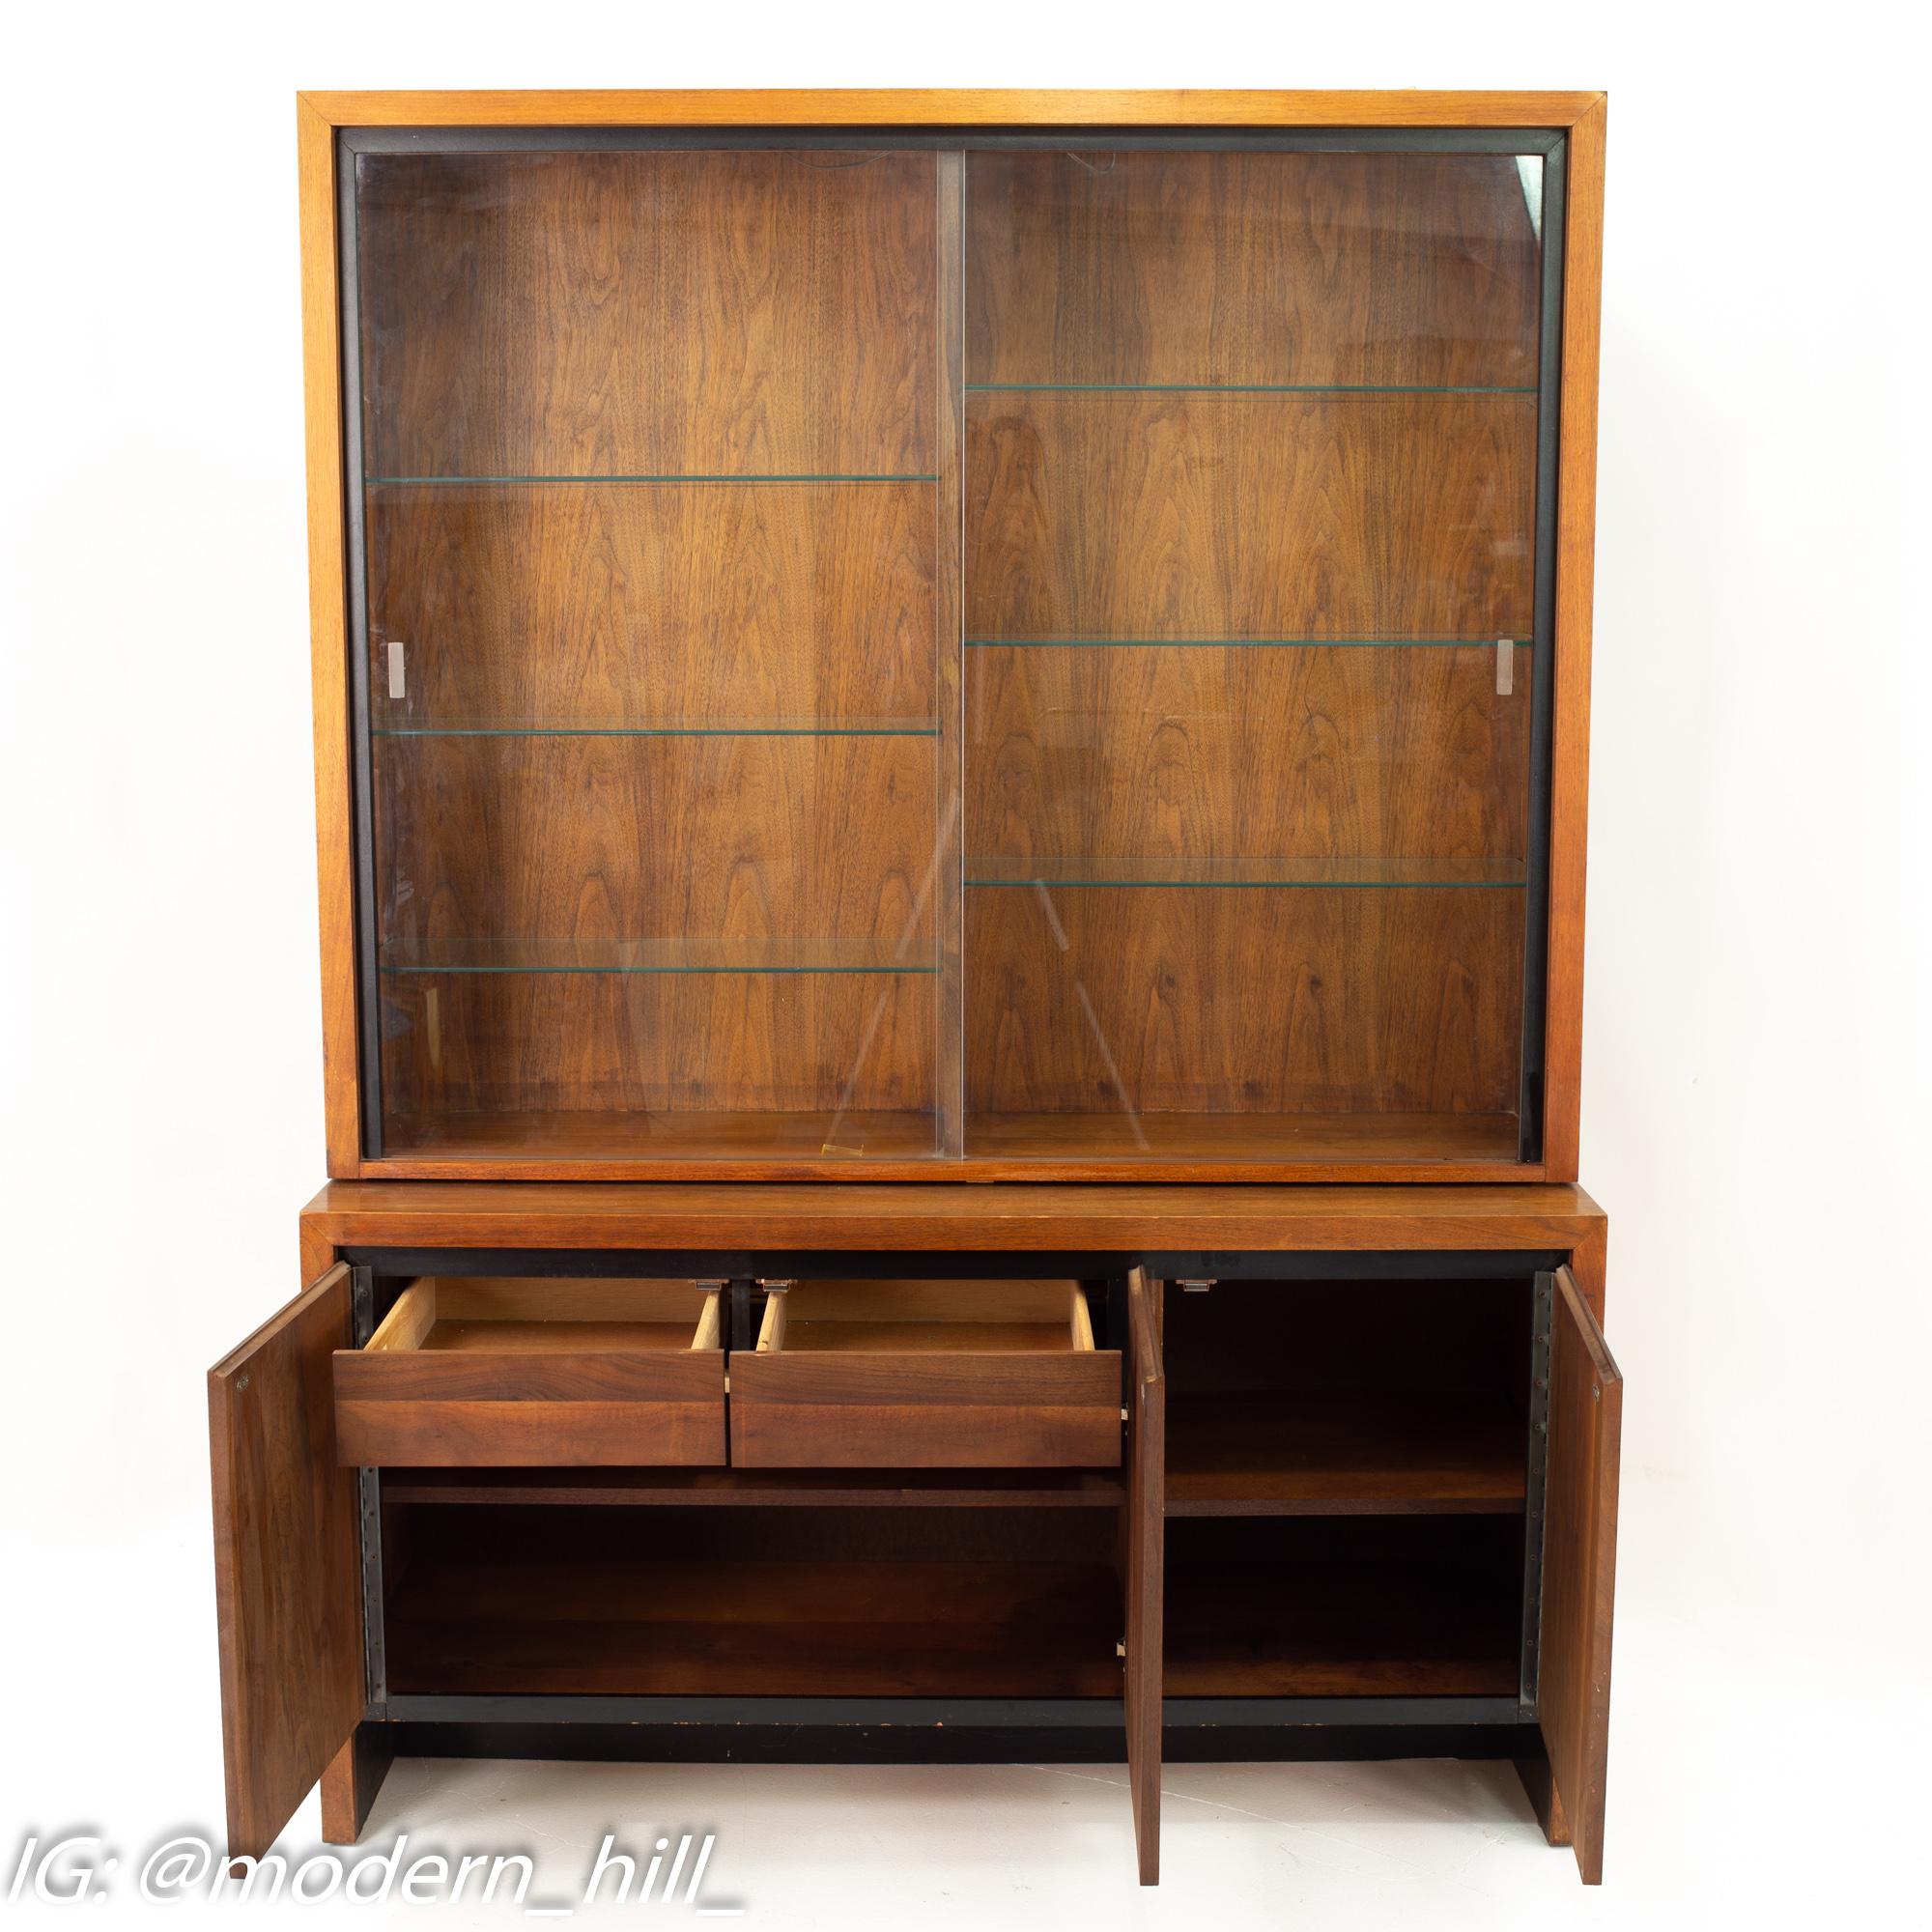 Milo Baughman for Dillingham midcentury bookmatched walnut China cabinet

Cabinet measures: 56.5 wide x 19 deep x 77.5 high

This price includes getting this piece in what we call restored vintage condition. That means the piece is permanently